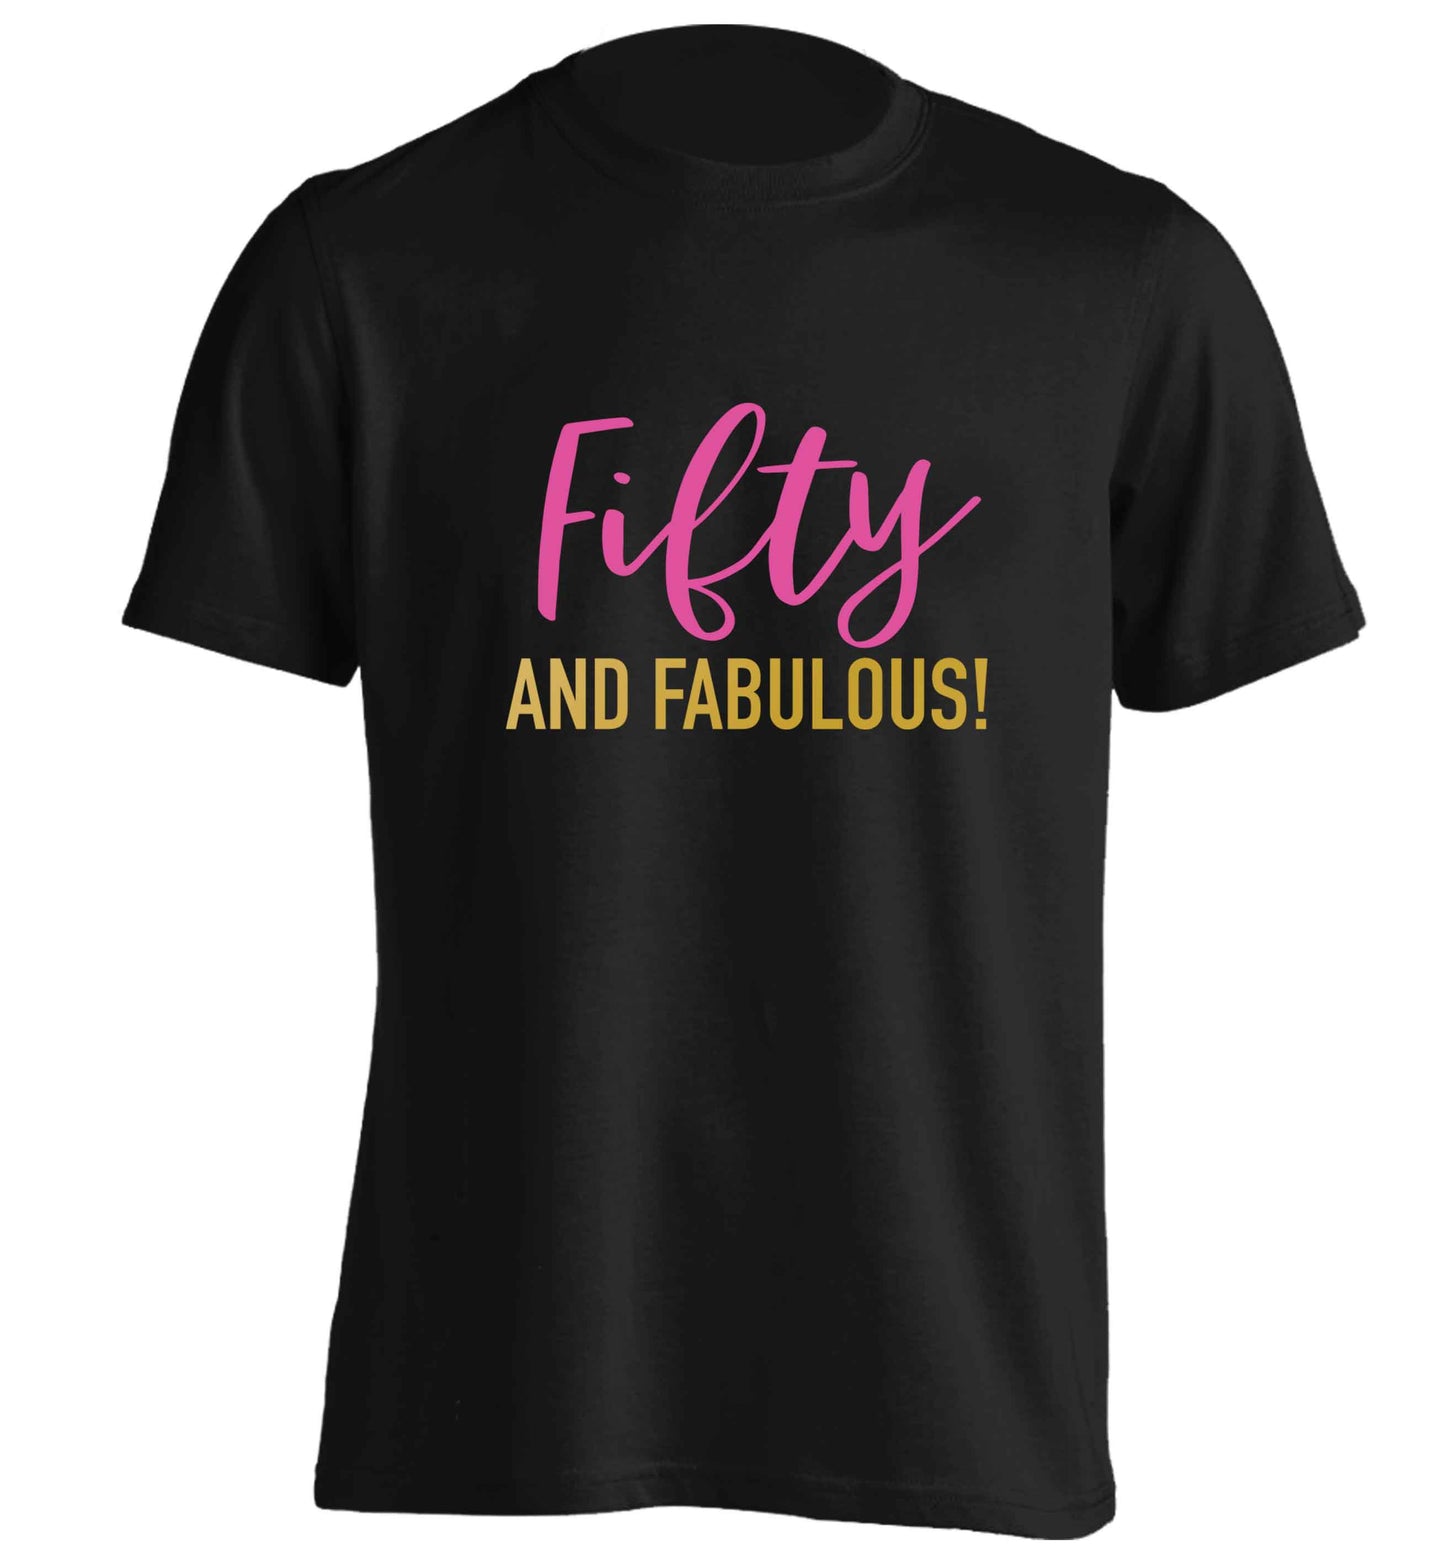 Fifty and fabulous adults unisex black Tshirt 2XL